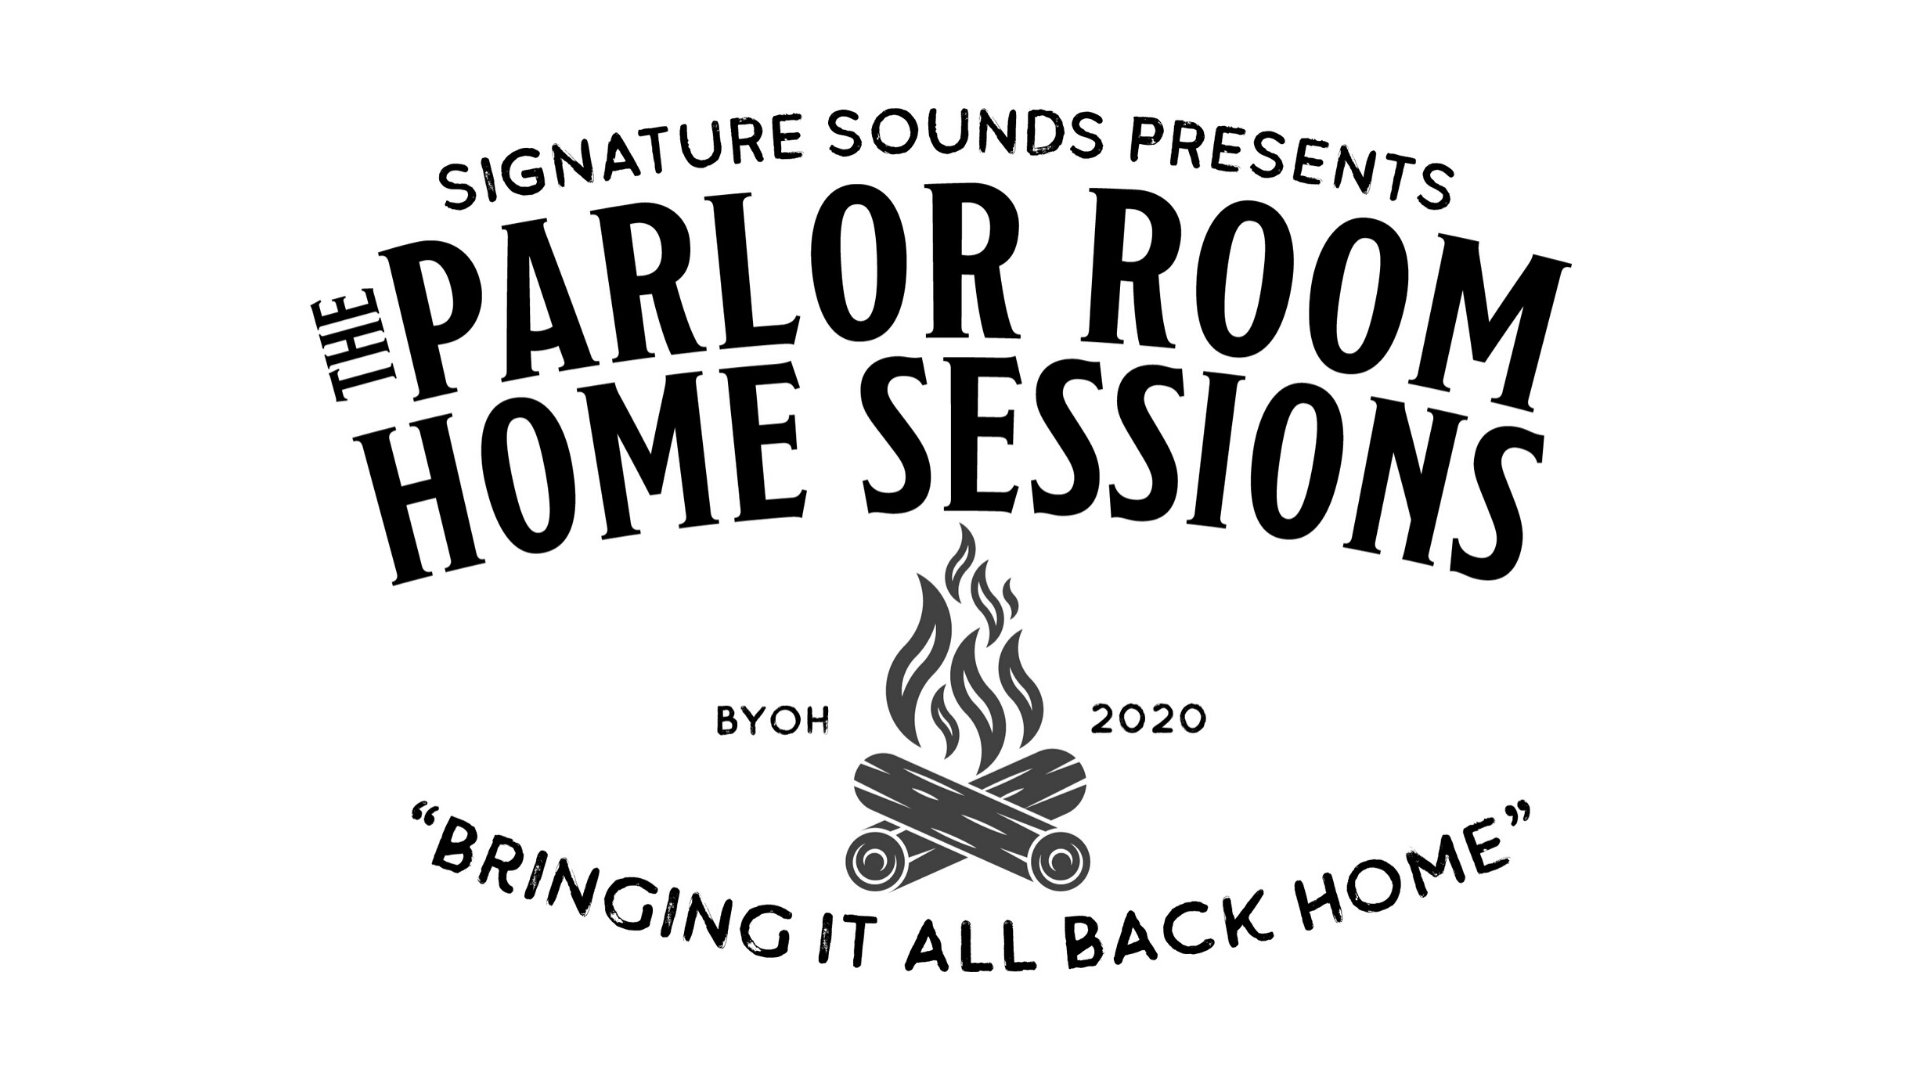 The Parlor Room Home Sessions: Rhiannon Giddens with Francesco Turrisi